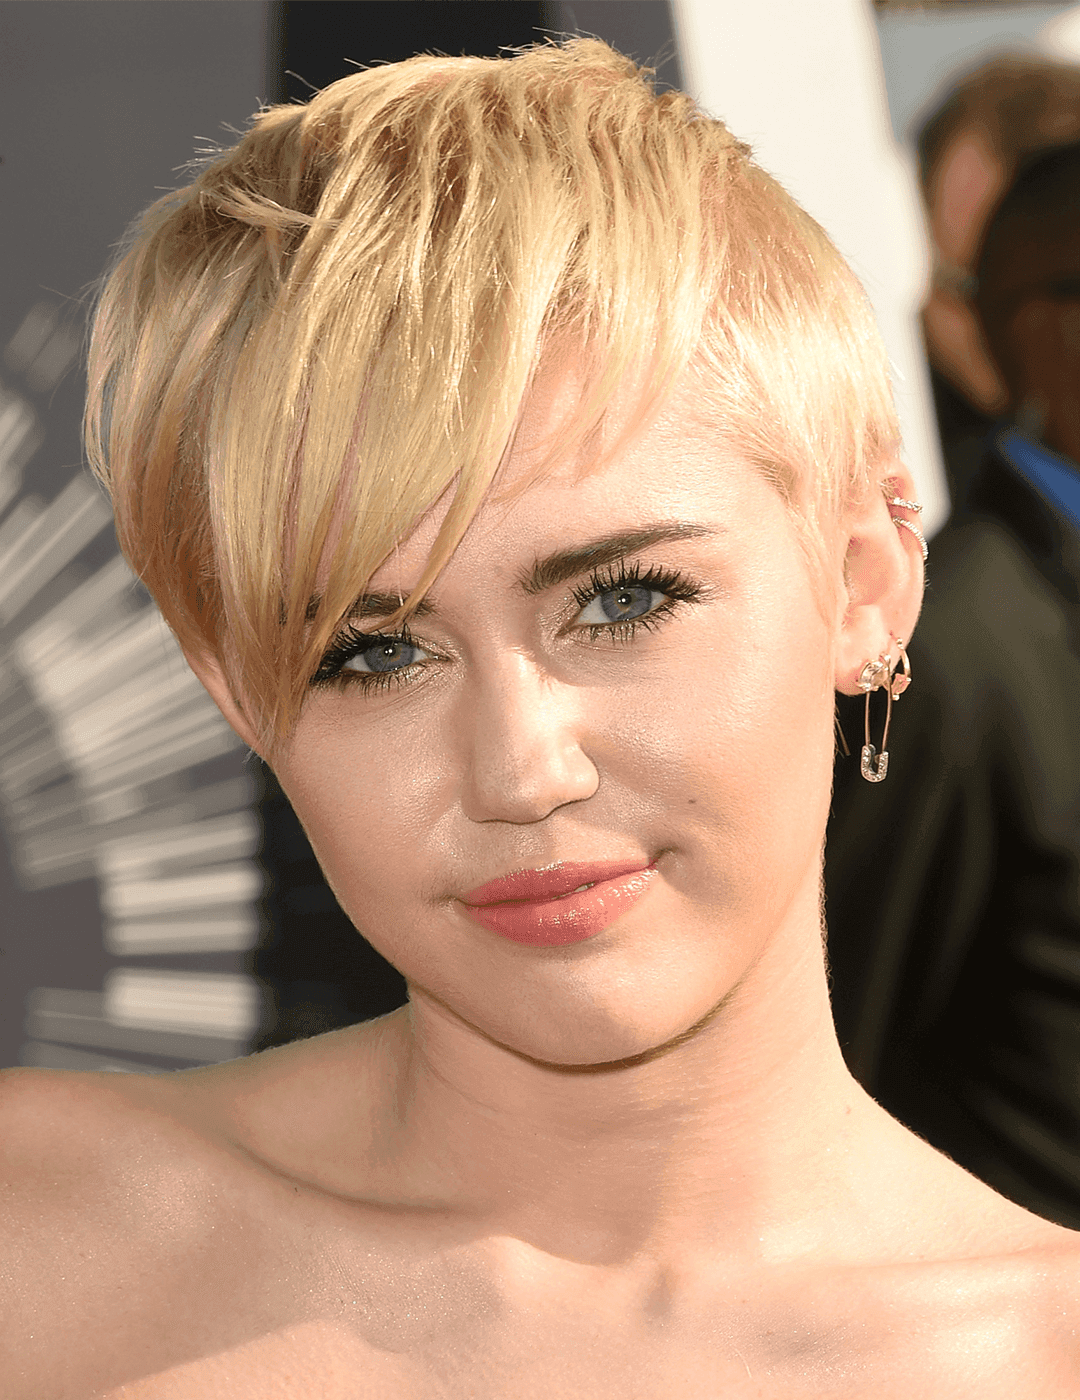 Miley Cyrus rocking a long pixie hairstyle